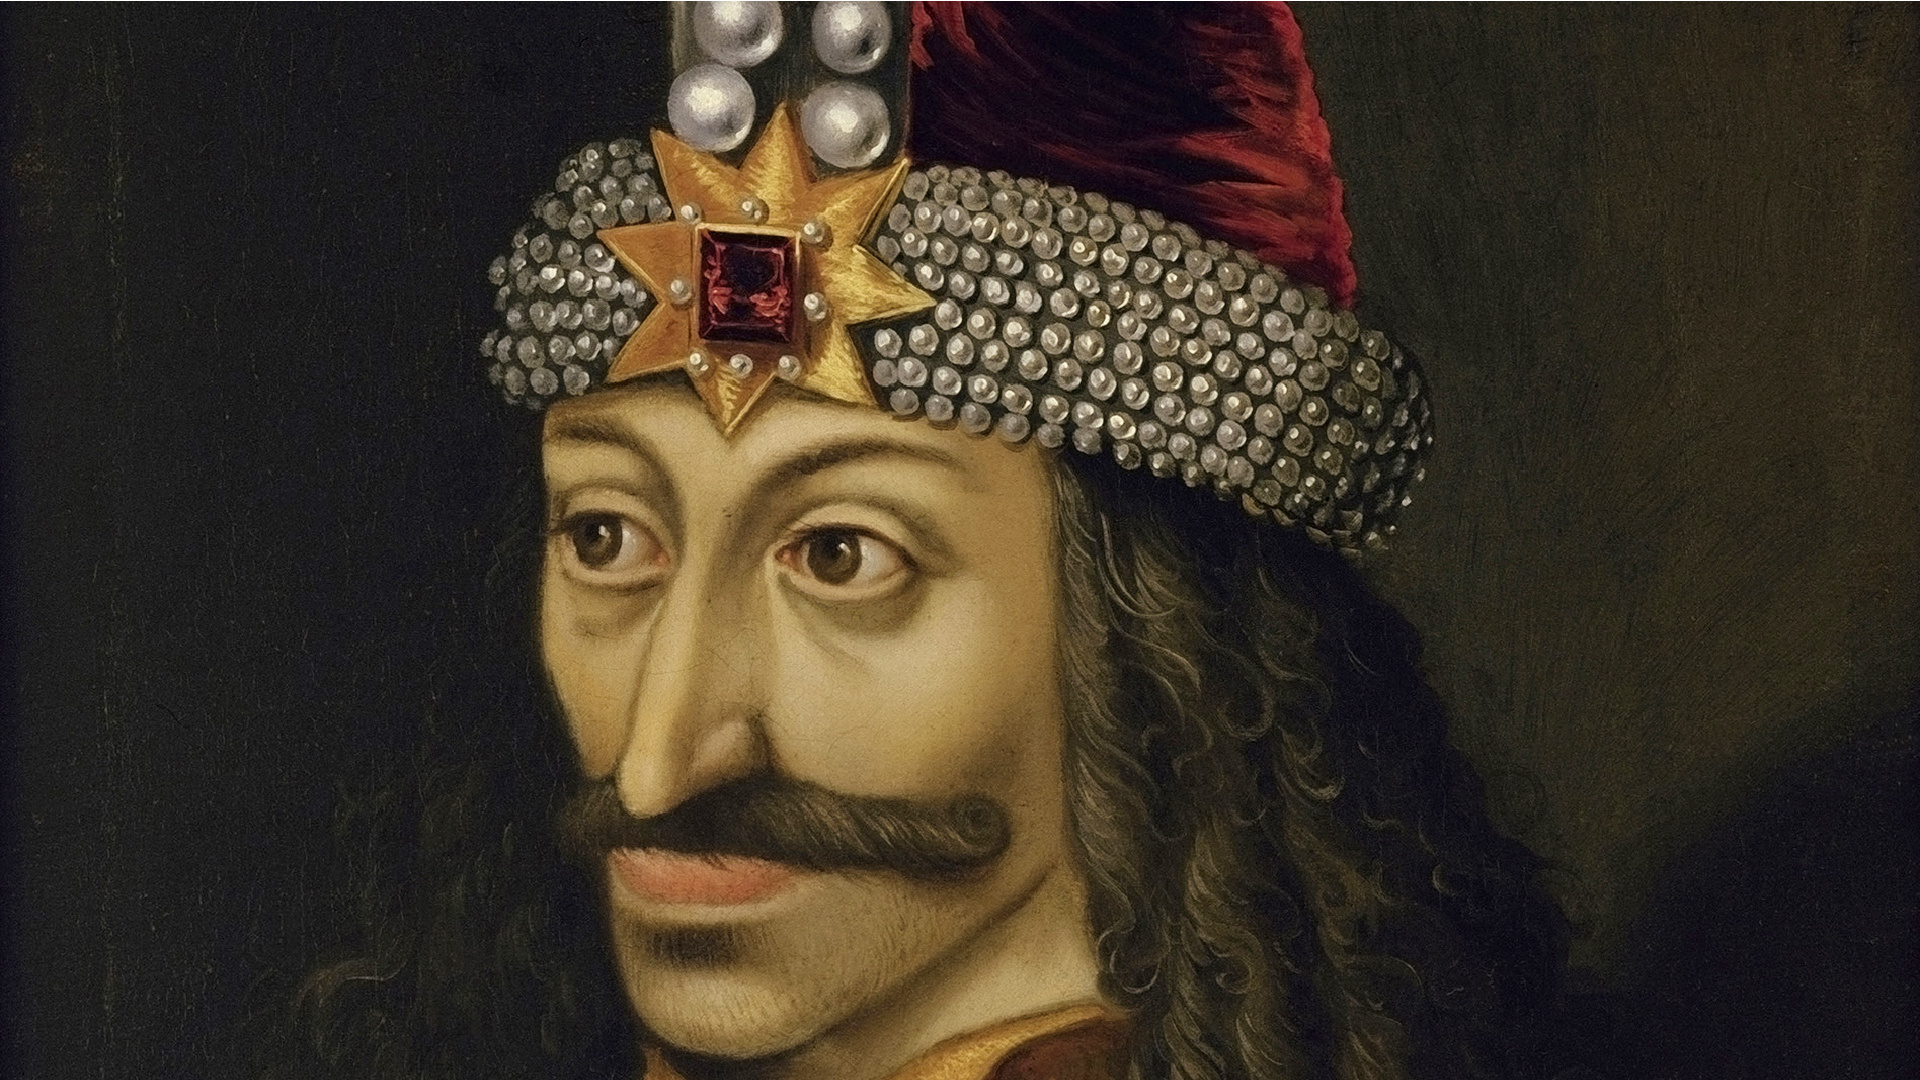 A distant relative of Vlad the Impaler